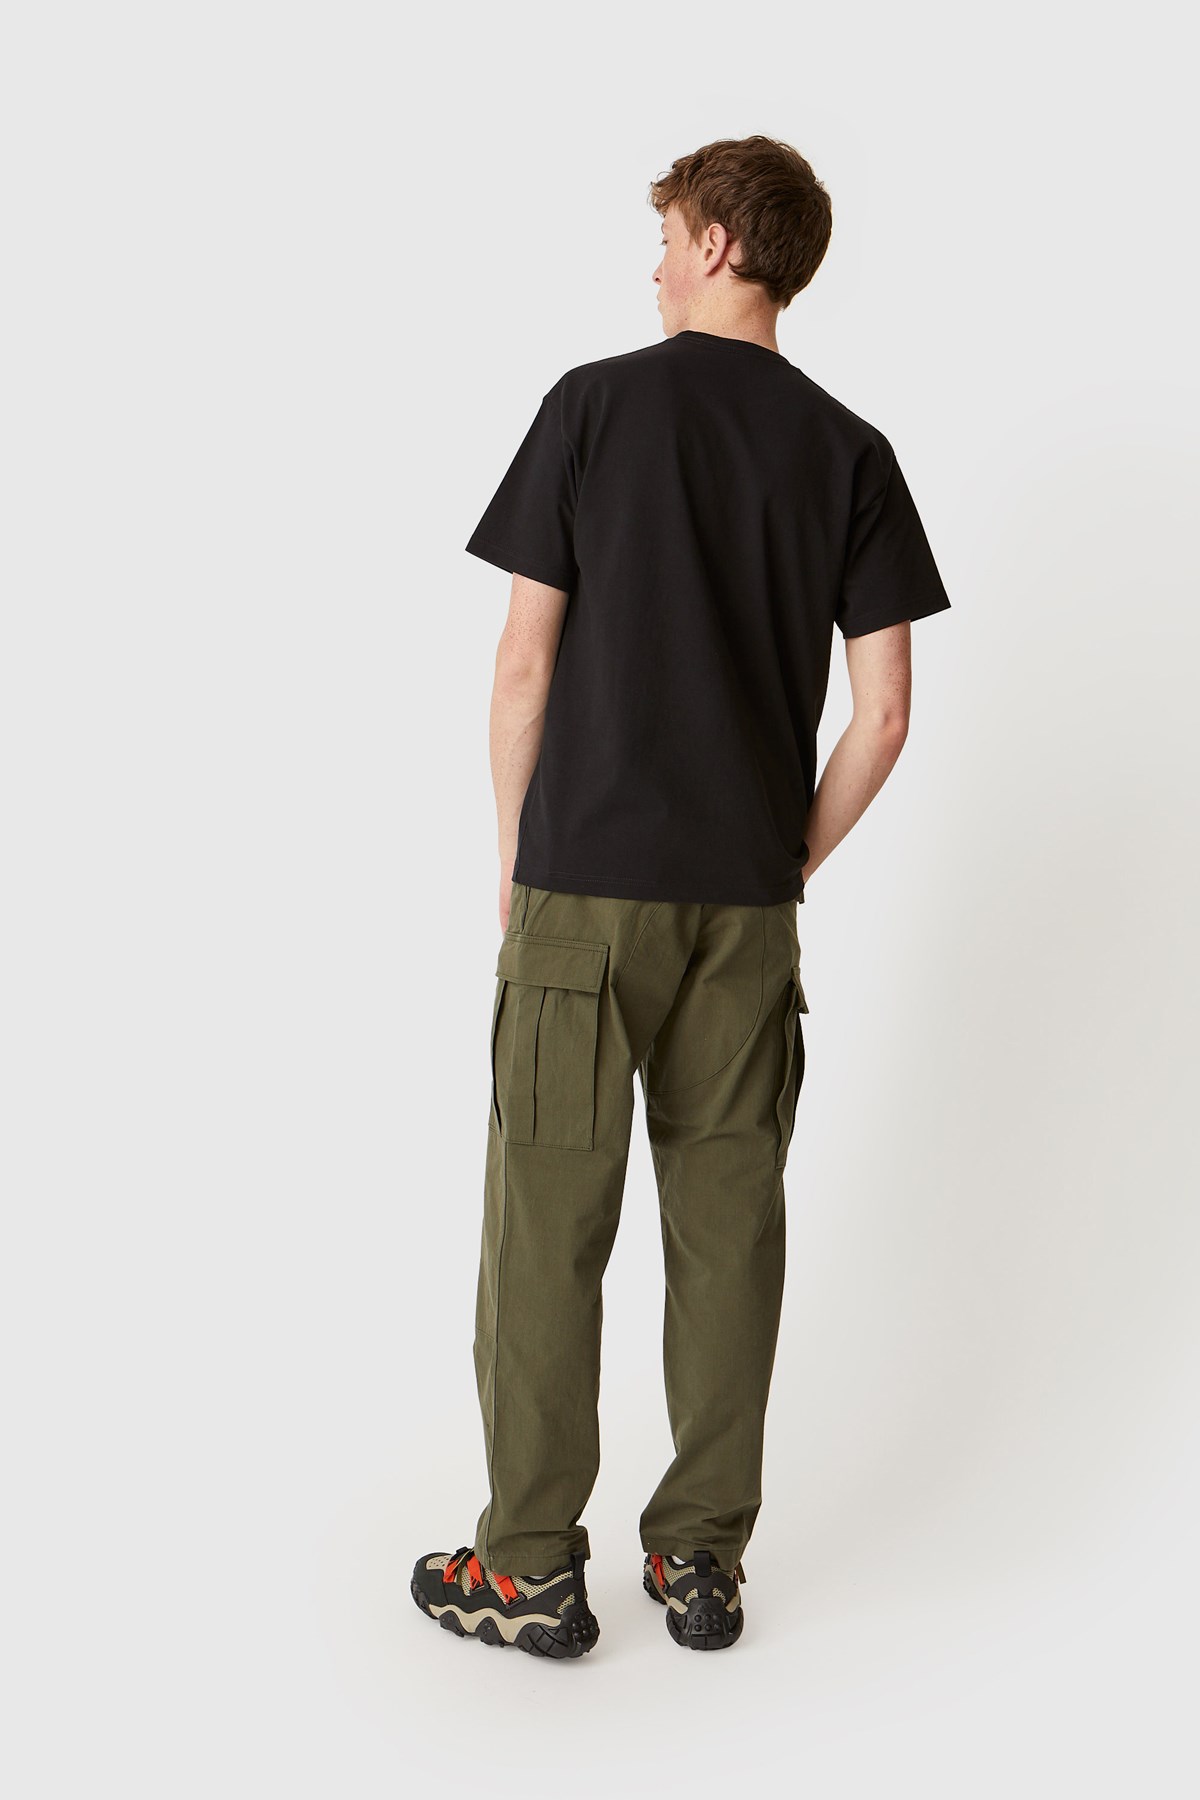 WTAPS WMILL-TROUSER NYCO RIPSTOP Olive